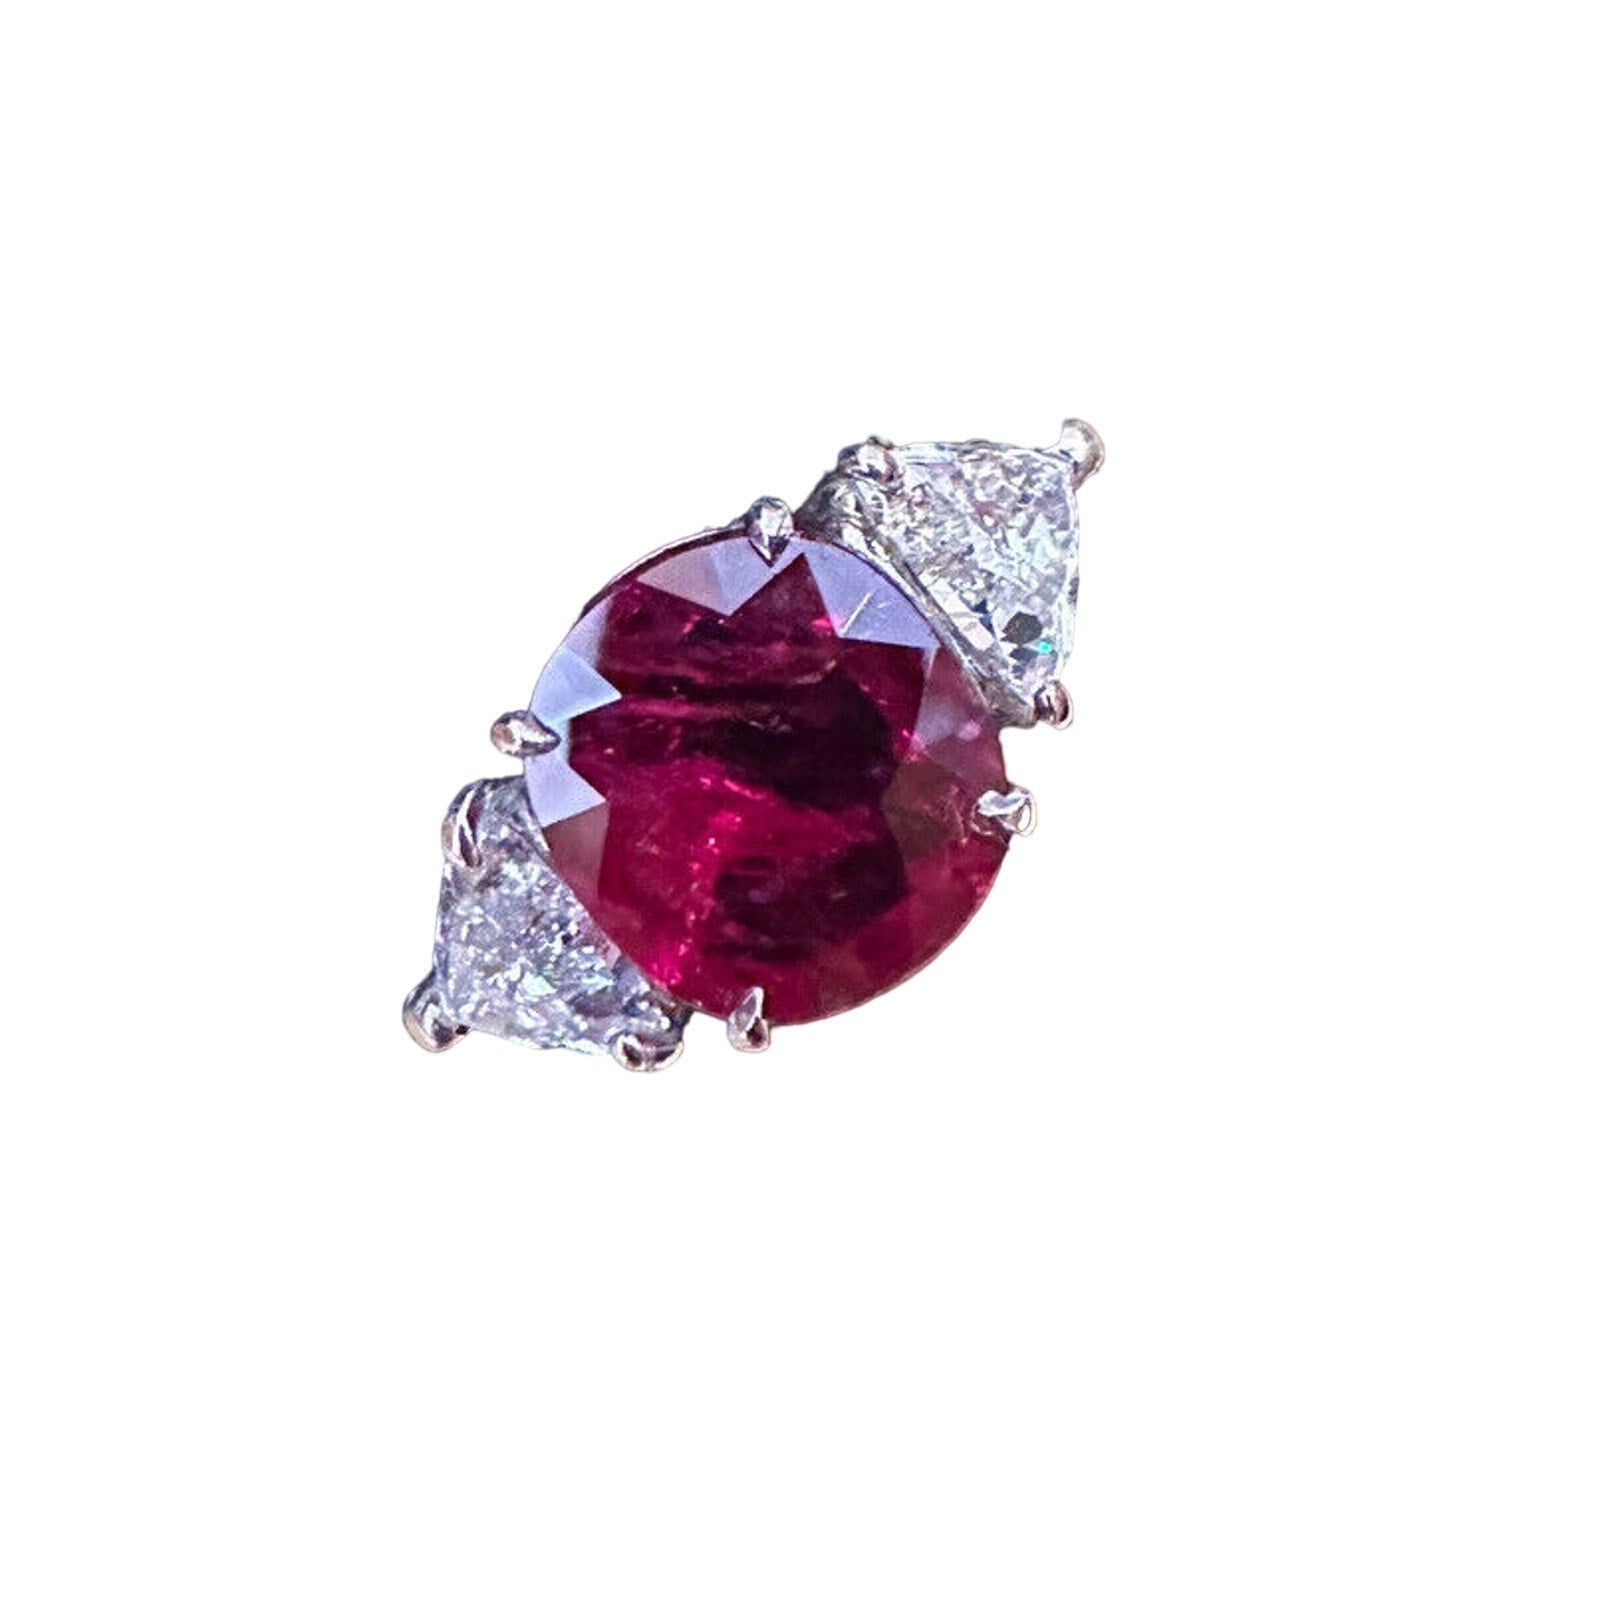 GRS Unheated 4.04 ct Cushion Cut Ruby Ring in Platinum with Diamonds - HM2518SV